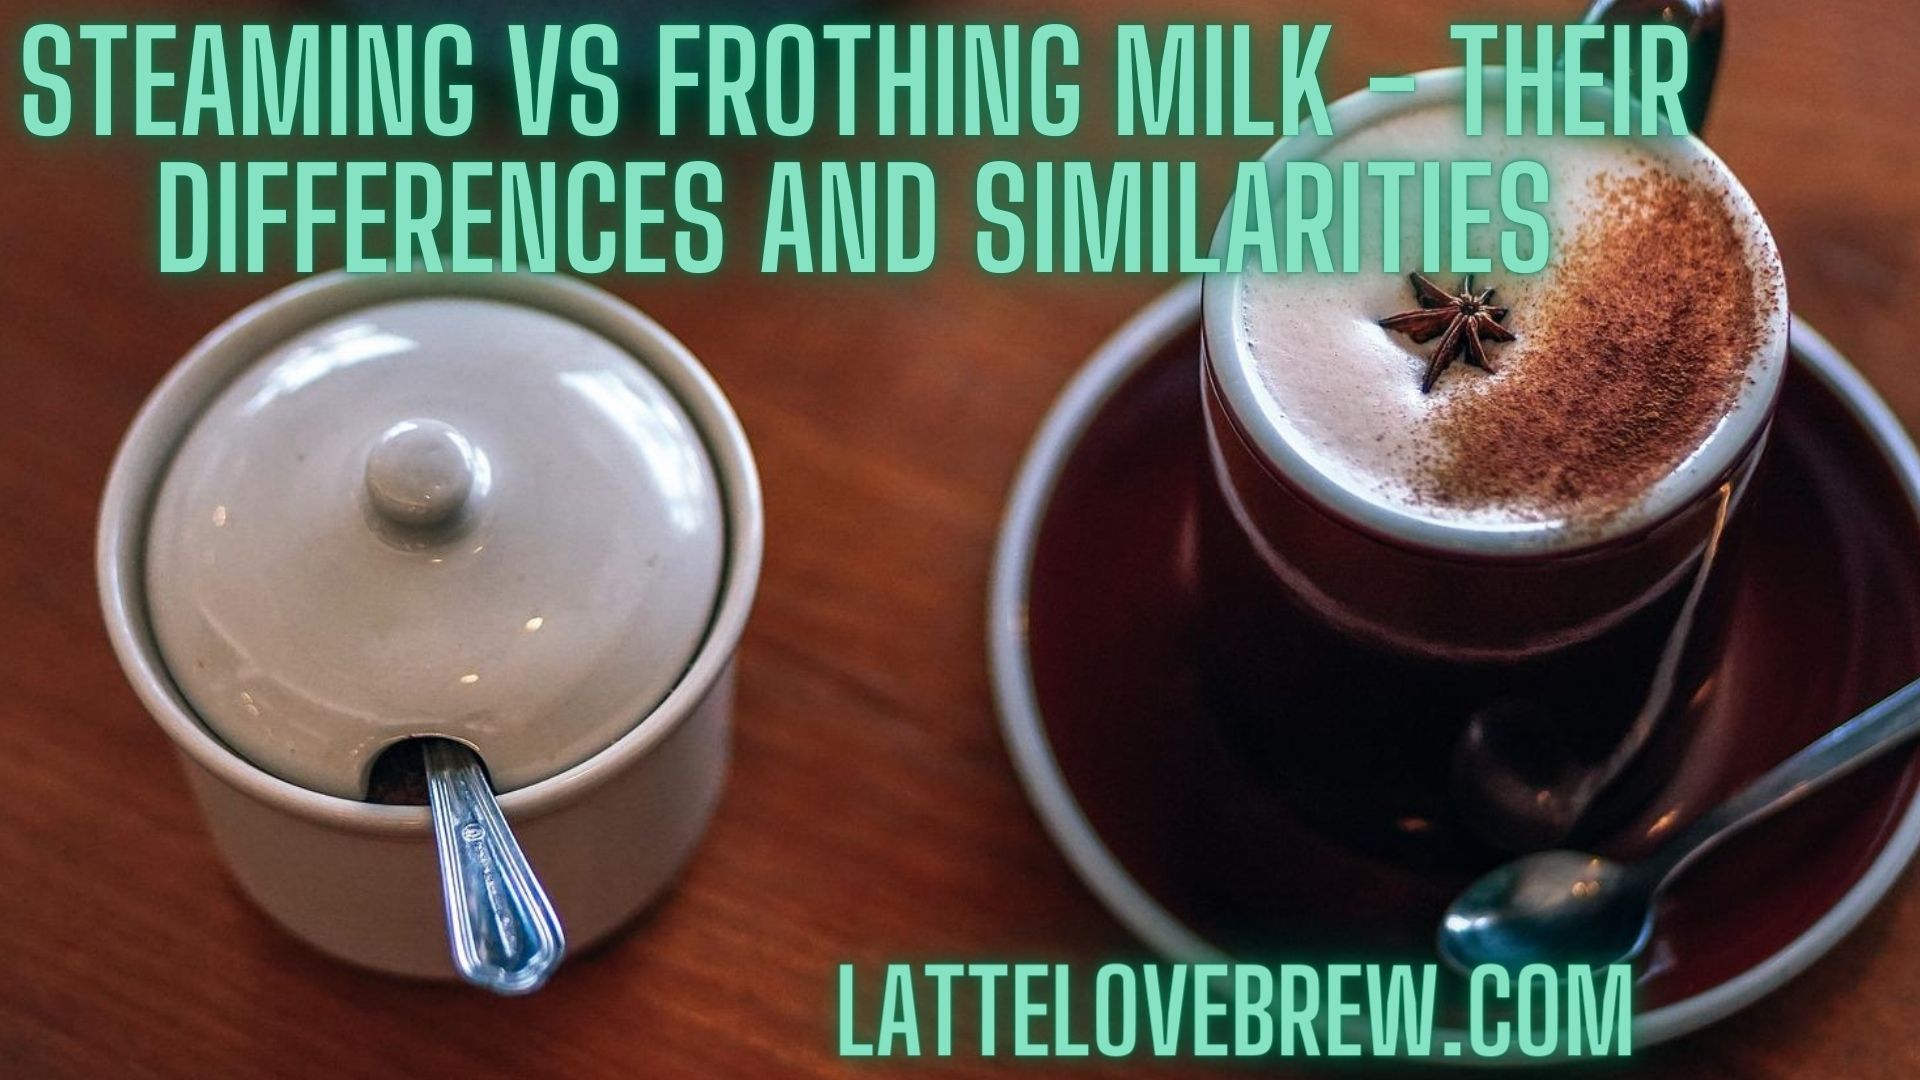 https://lattelovebrew.com/wp-content/uploads/2022/06/Steaming-Vs-Frothing-Milk-Their-Differences-And-Similarities.jpg